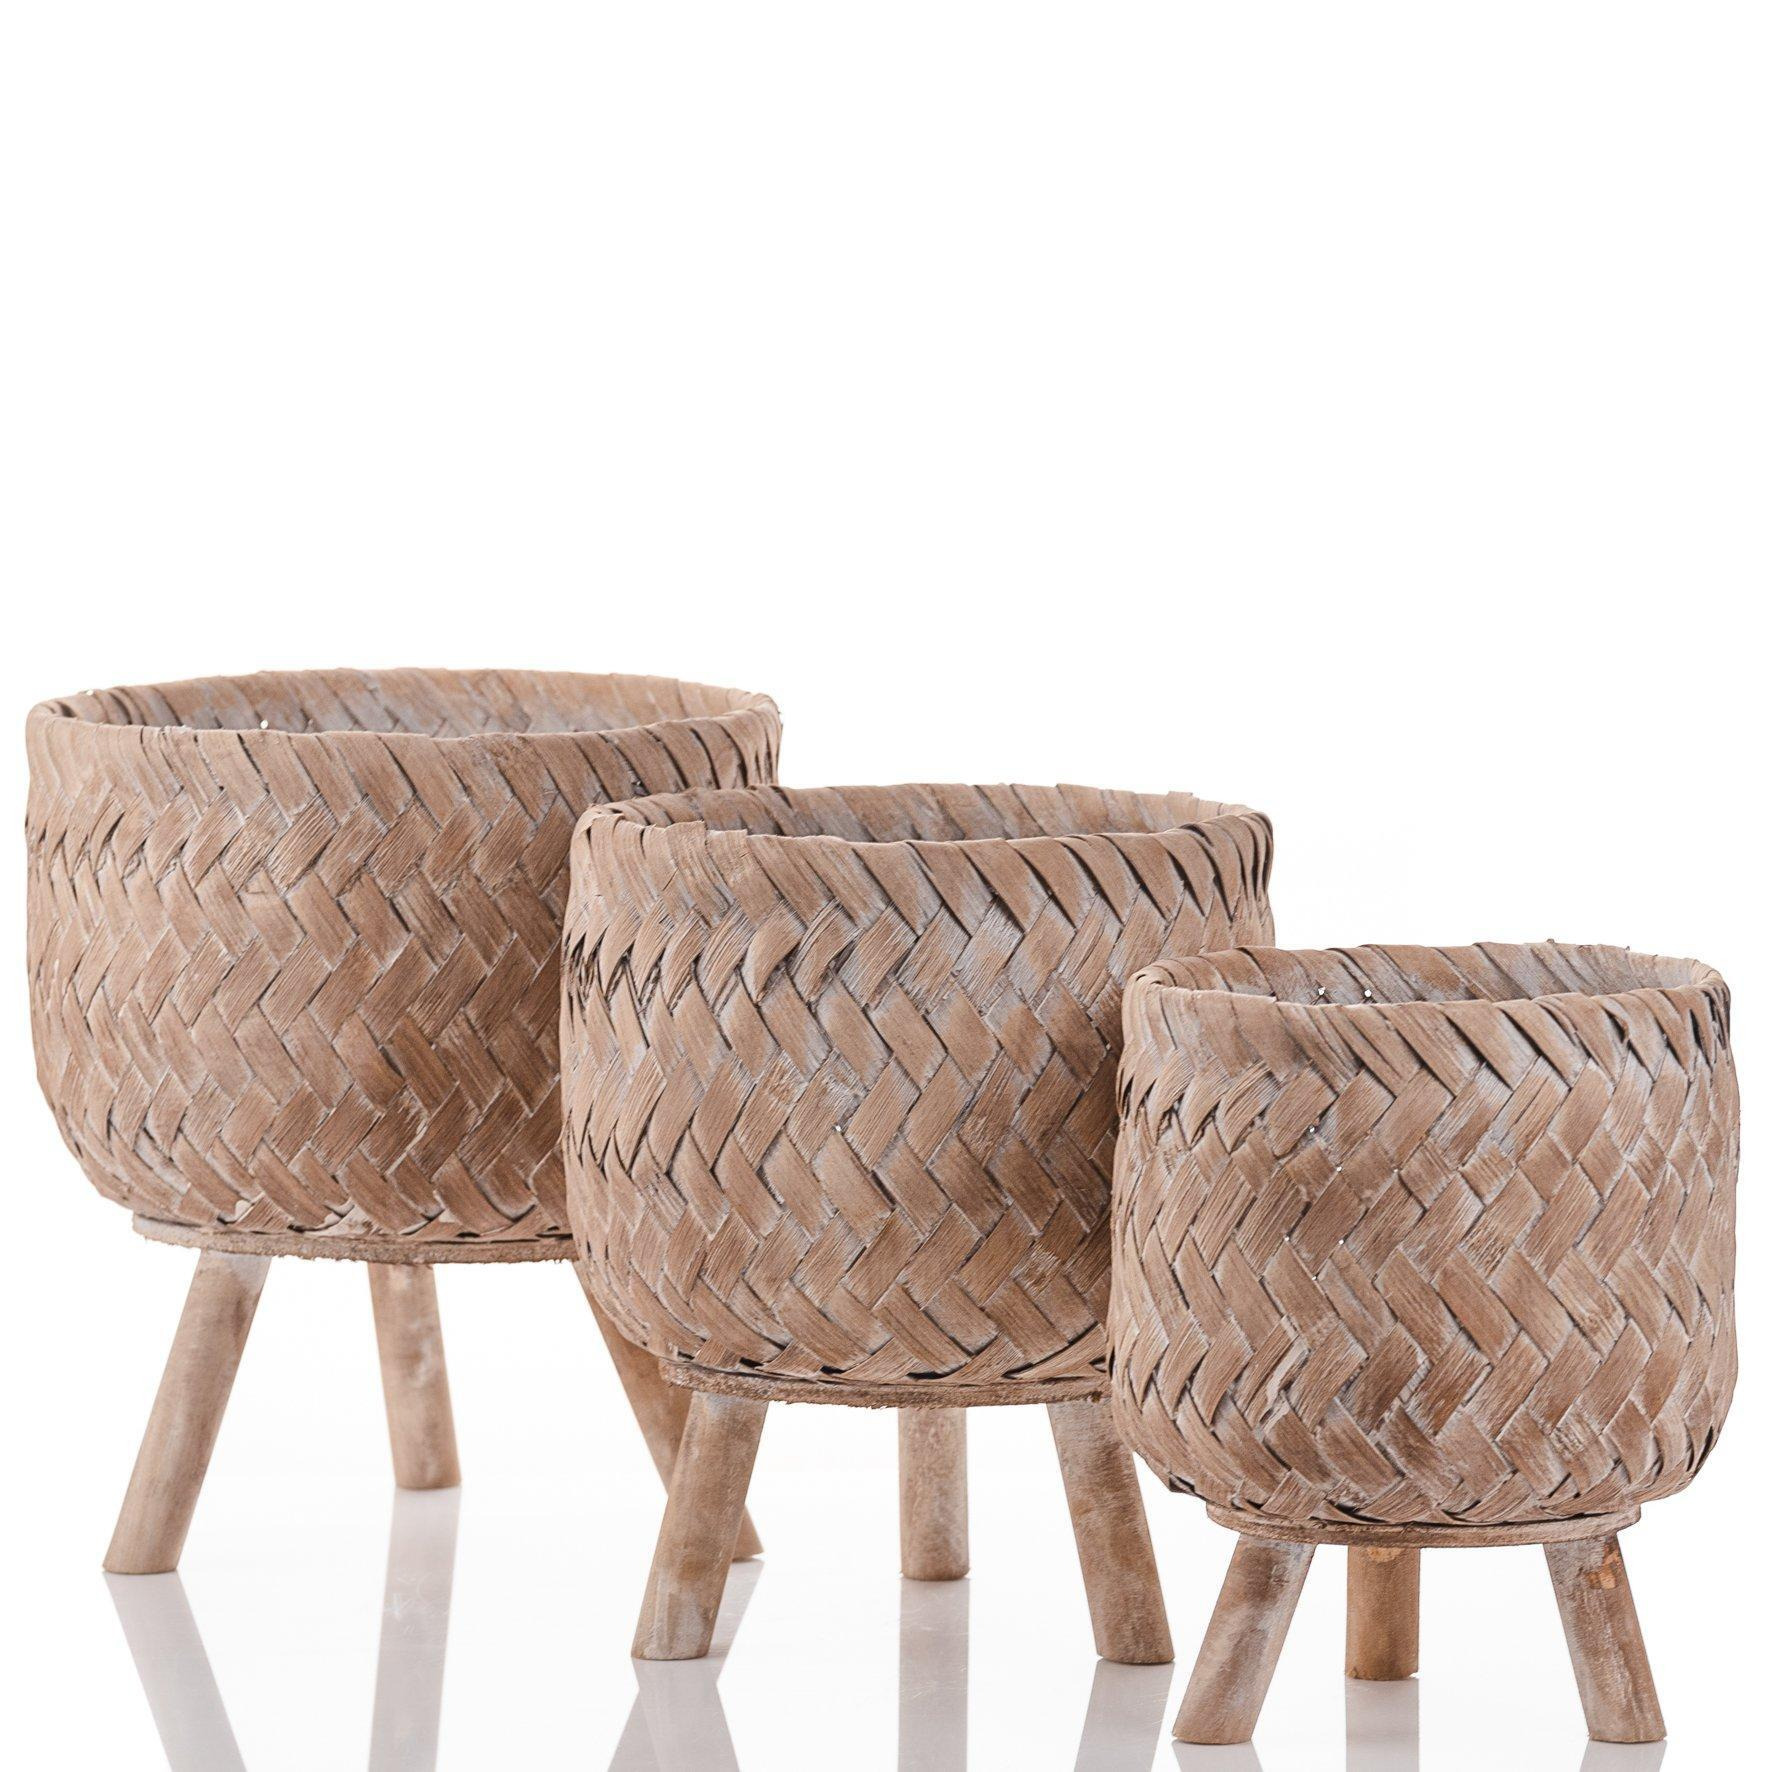 Set of 3 Woven Bamboo Indoor Footed Planters - image 1